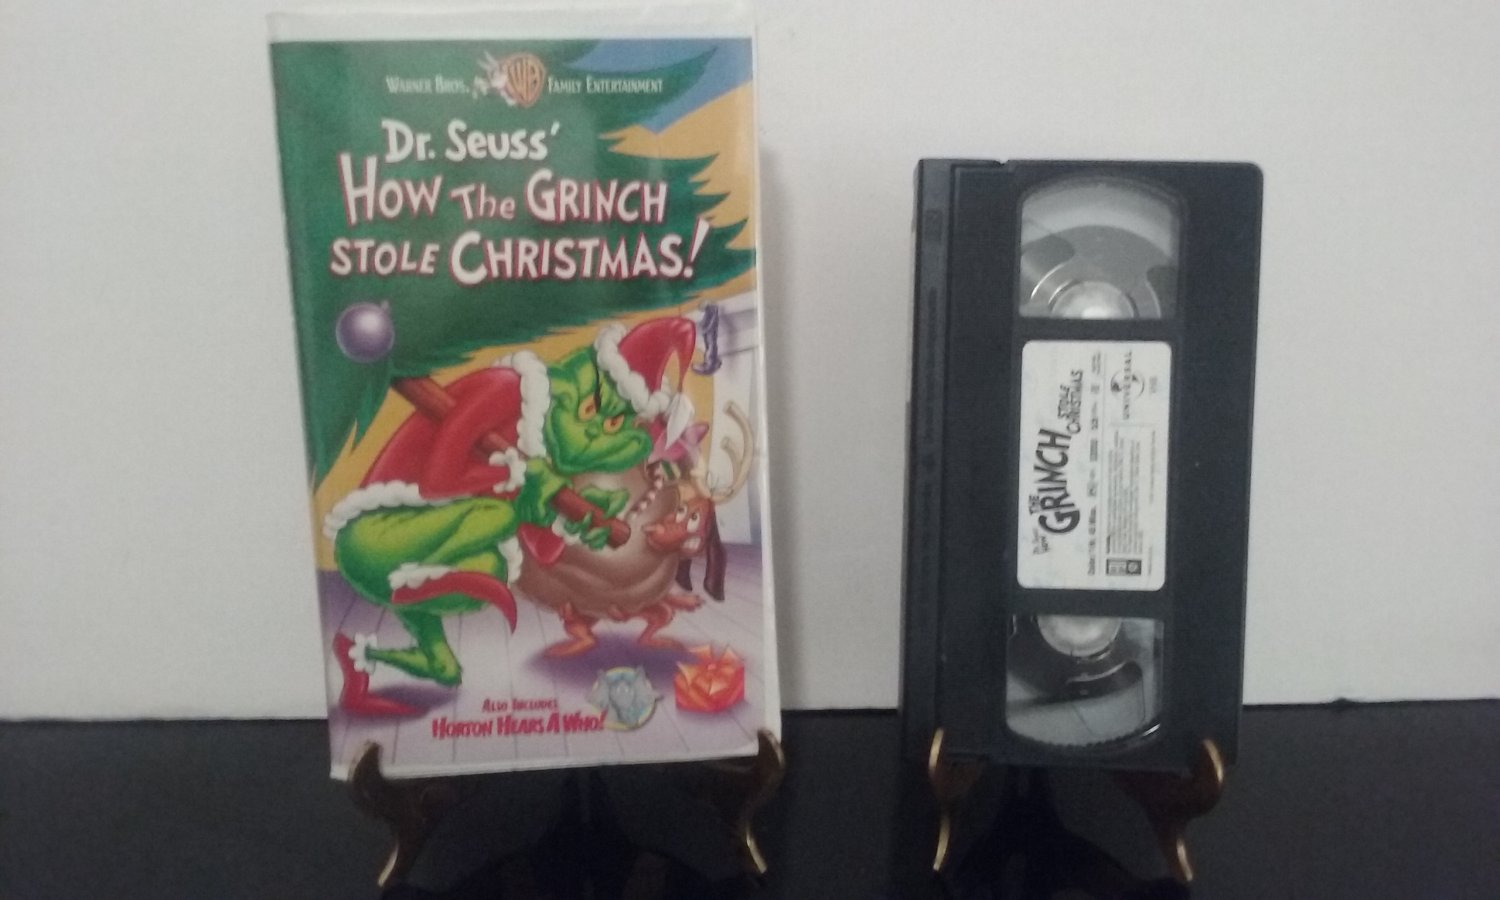 Dr. Seuss - How The Grinch Stole Christmas - Circa 1999 - Vhs Tape